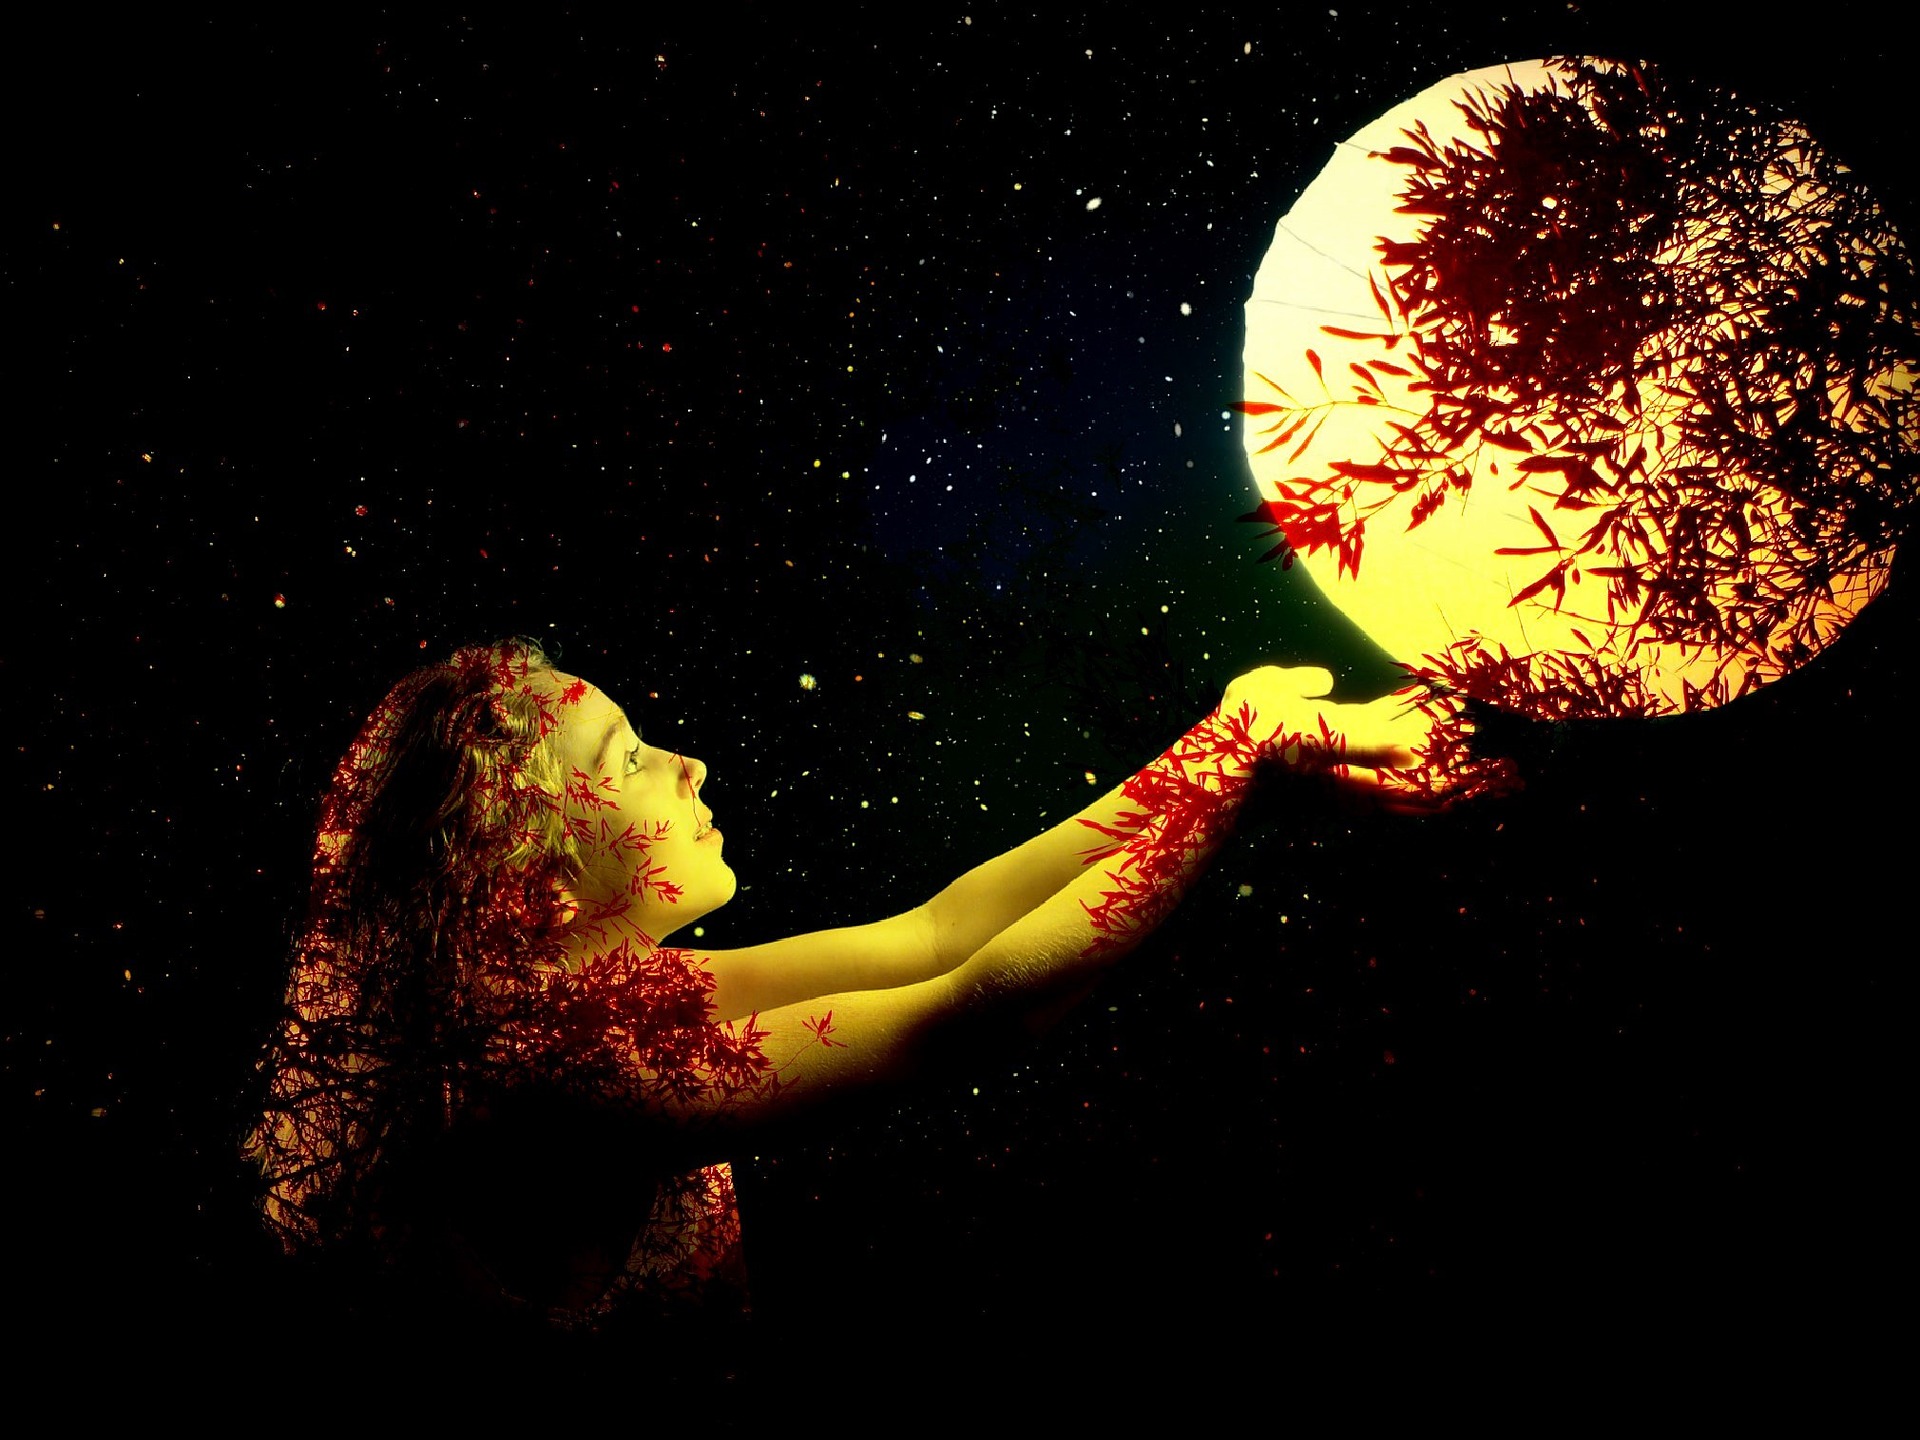 Woman holding hands to the moon on a journey to discovery